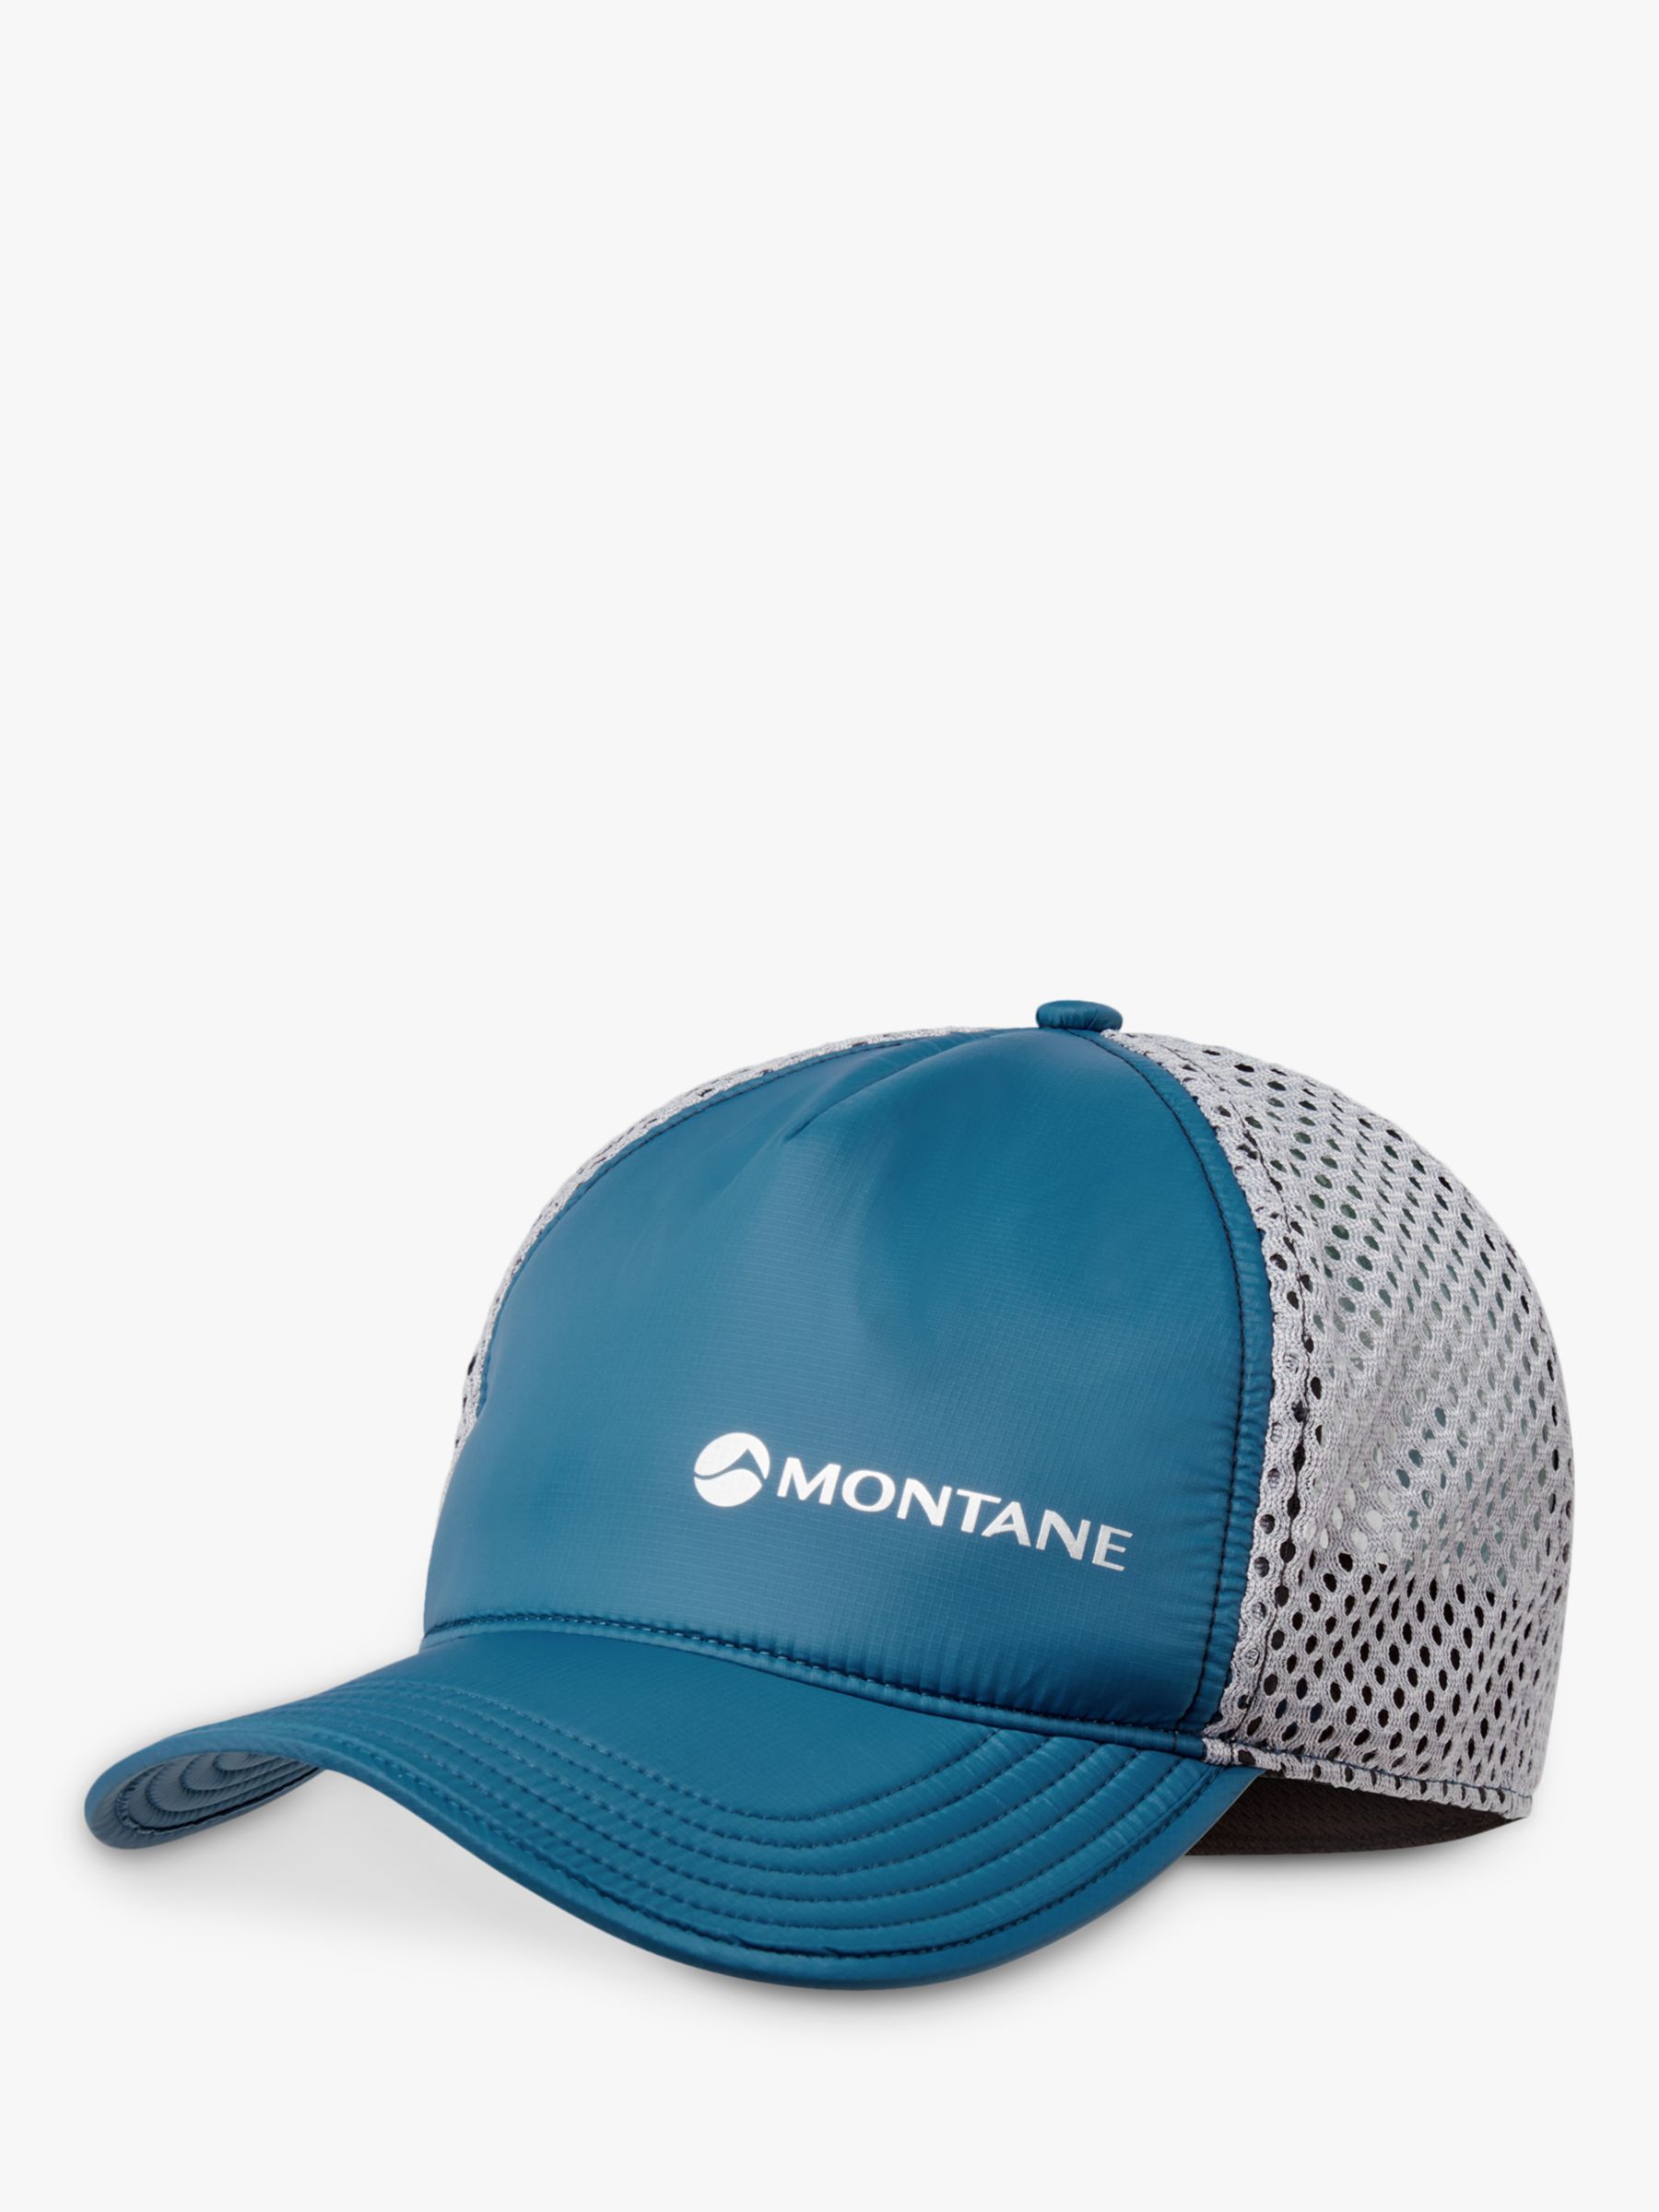 Montane Active Trucker Cap, Narwhal Blue, One Size